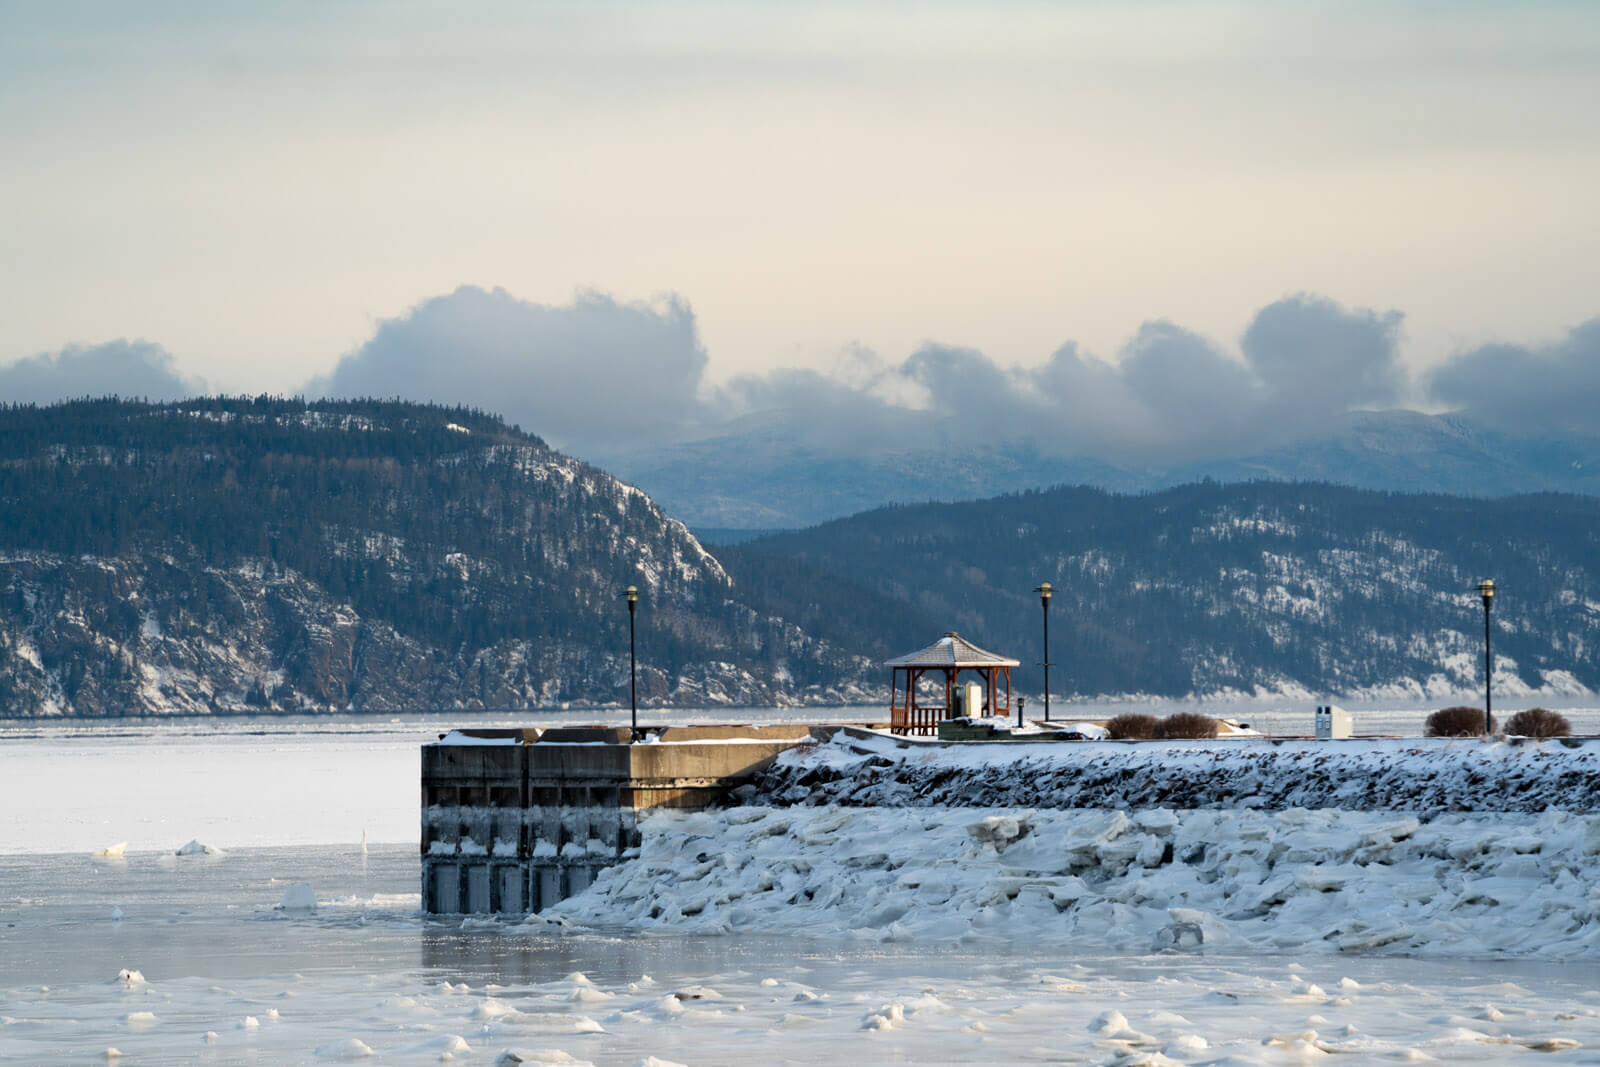 view of the Saguenay fjord in la baie quebec canada in winter